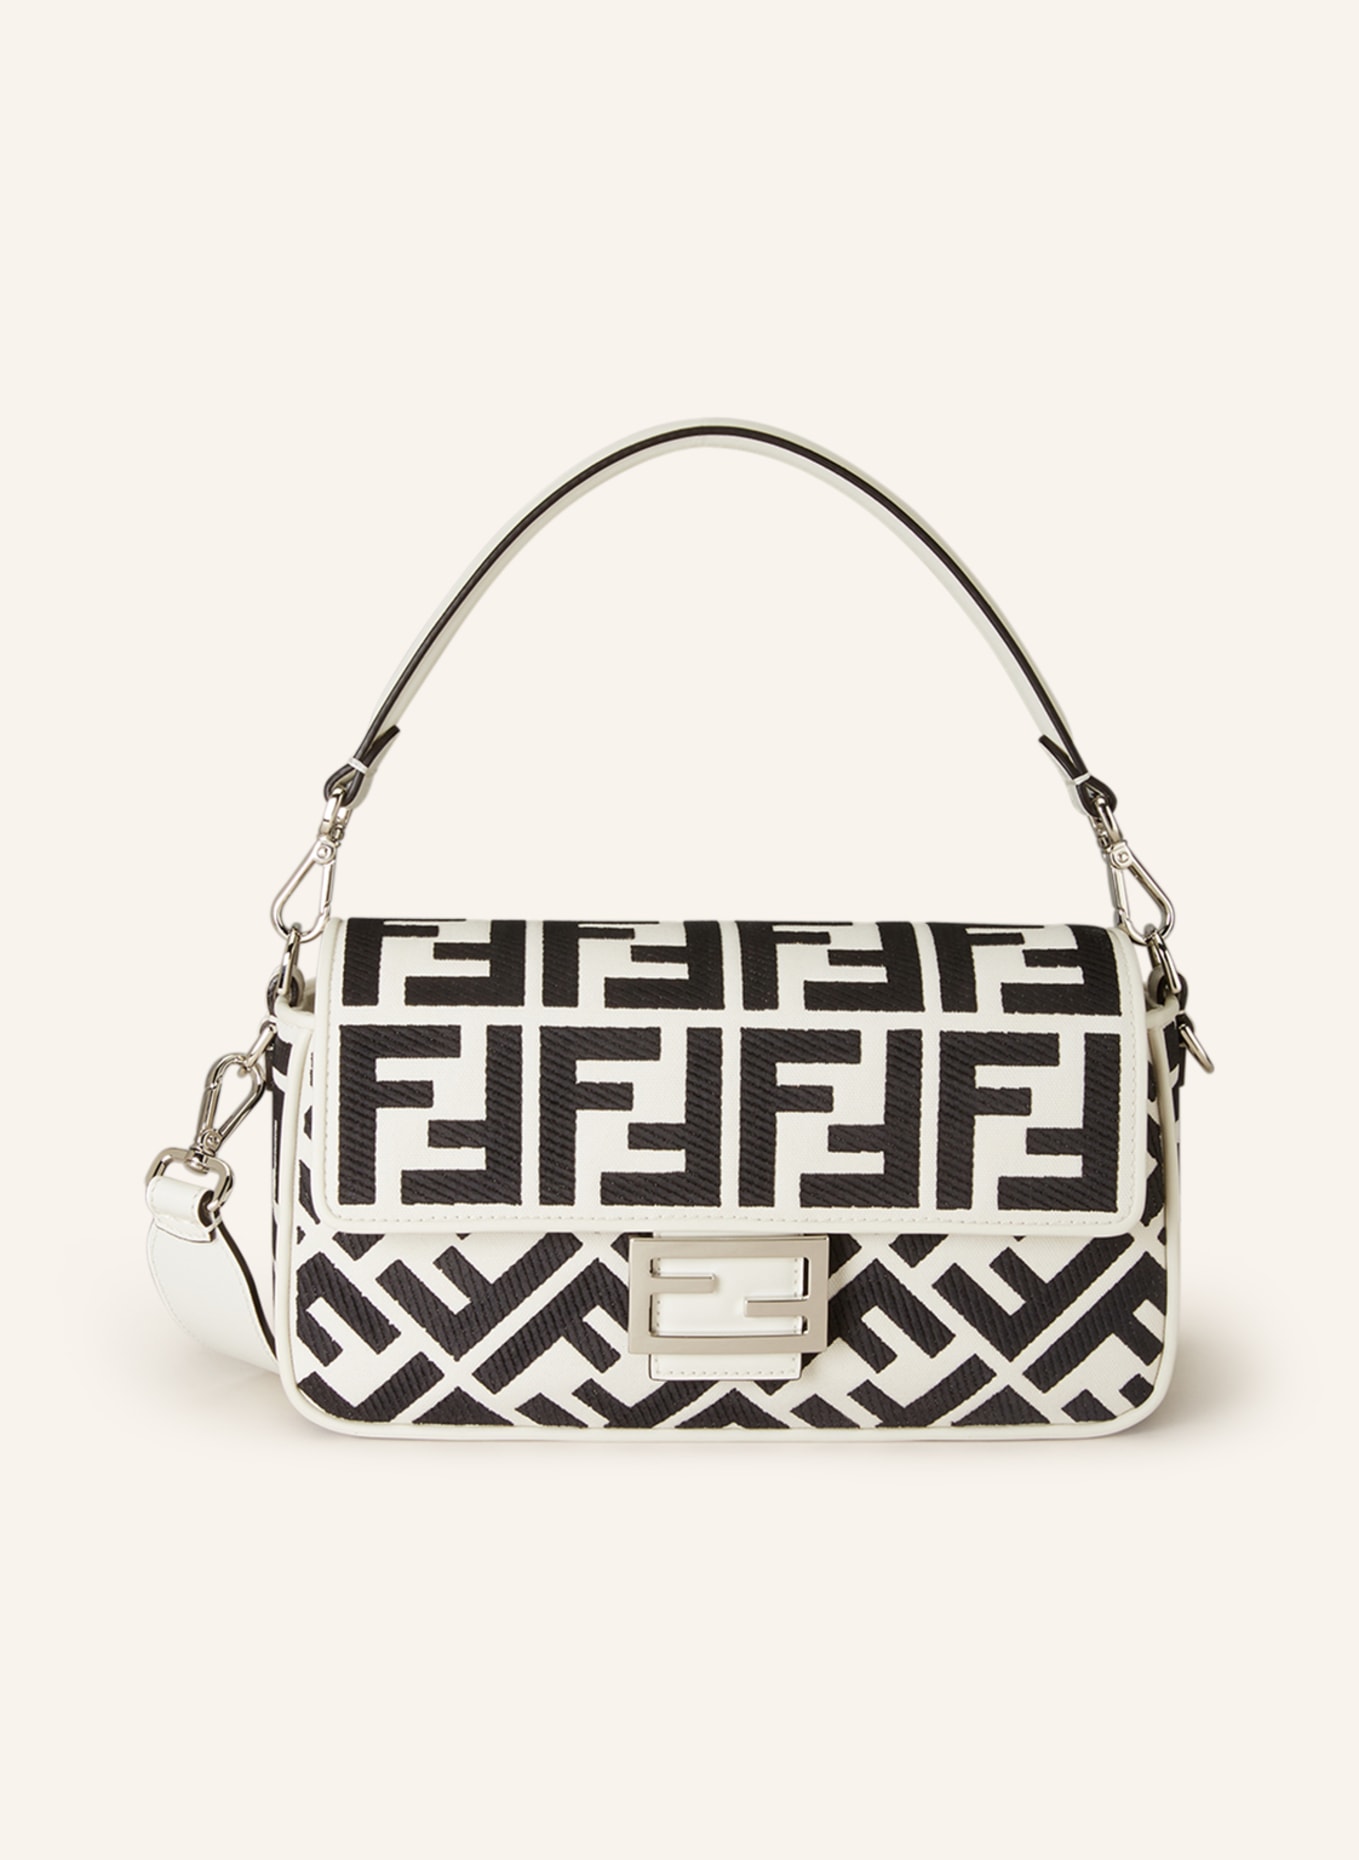 A Close Look at the Fendi Roma Amor Baguette Bag - PurseBlog | Fendi  baguette, Fendi bag strap, Fendi bags